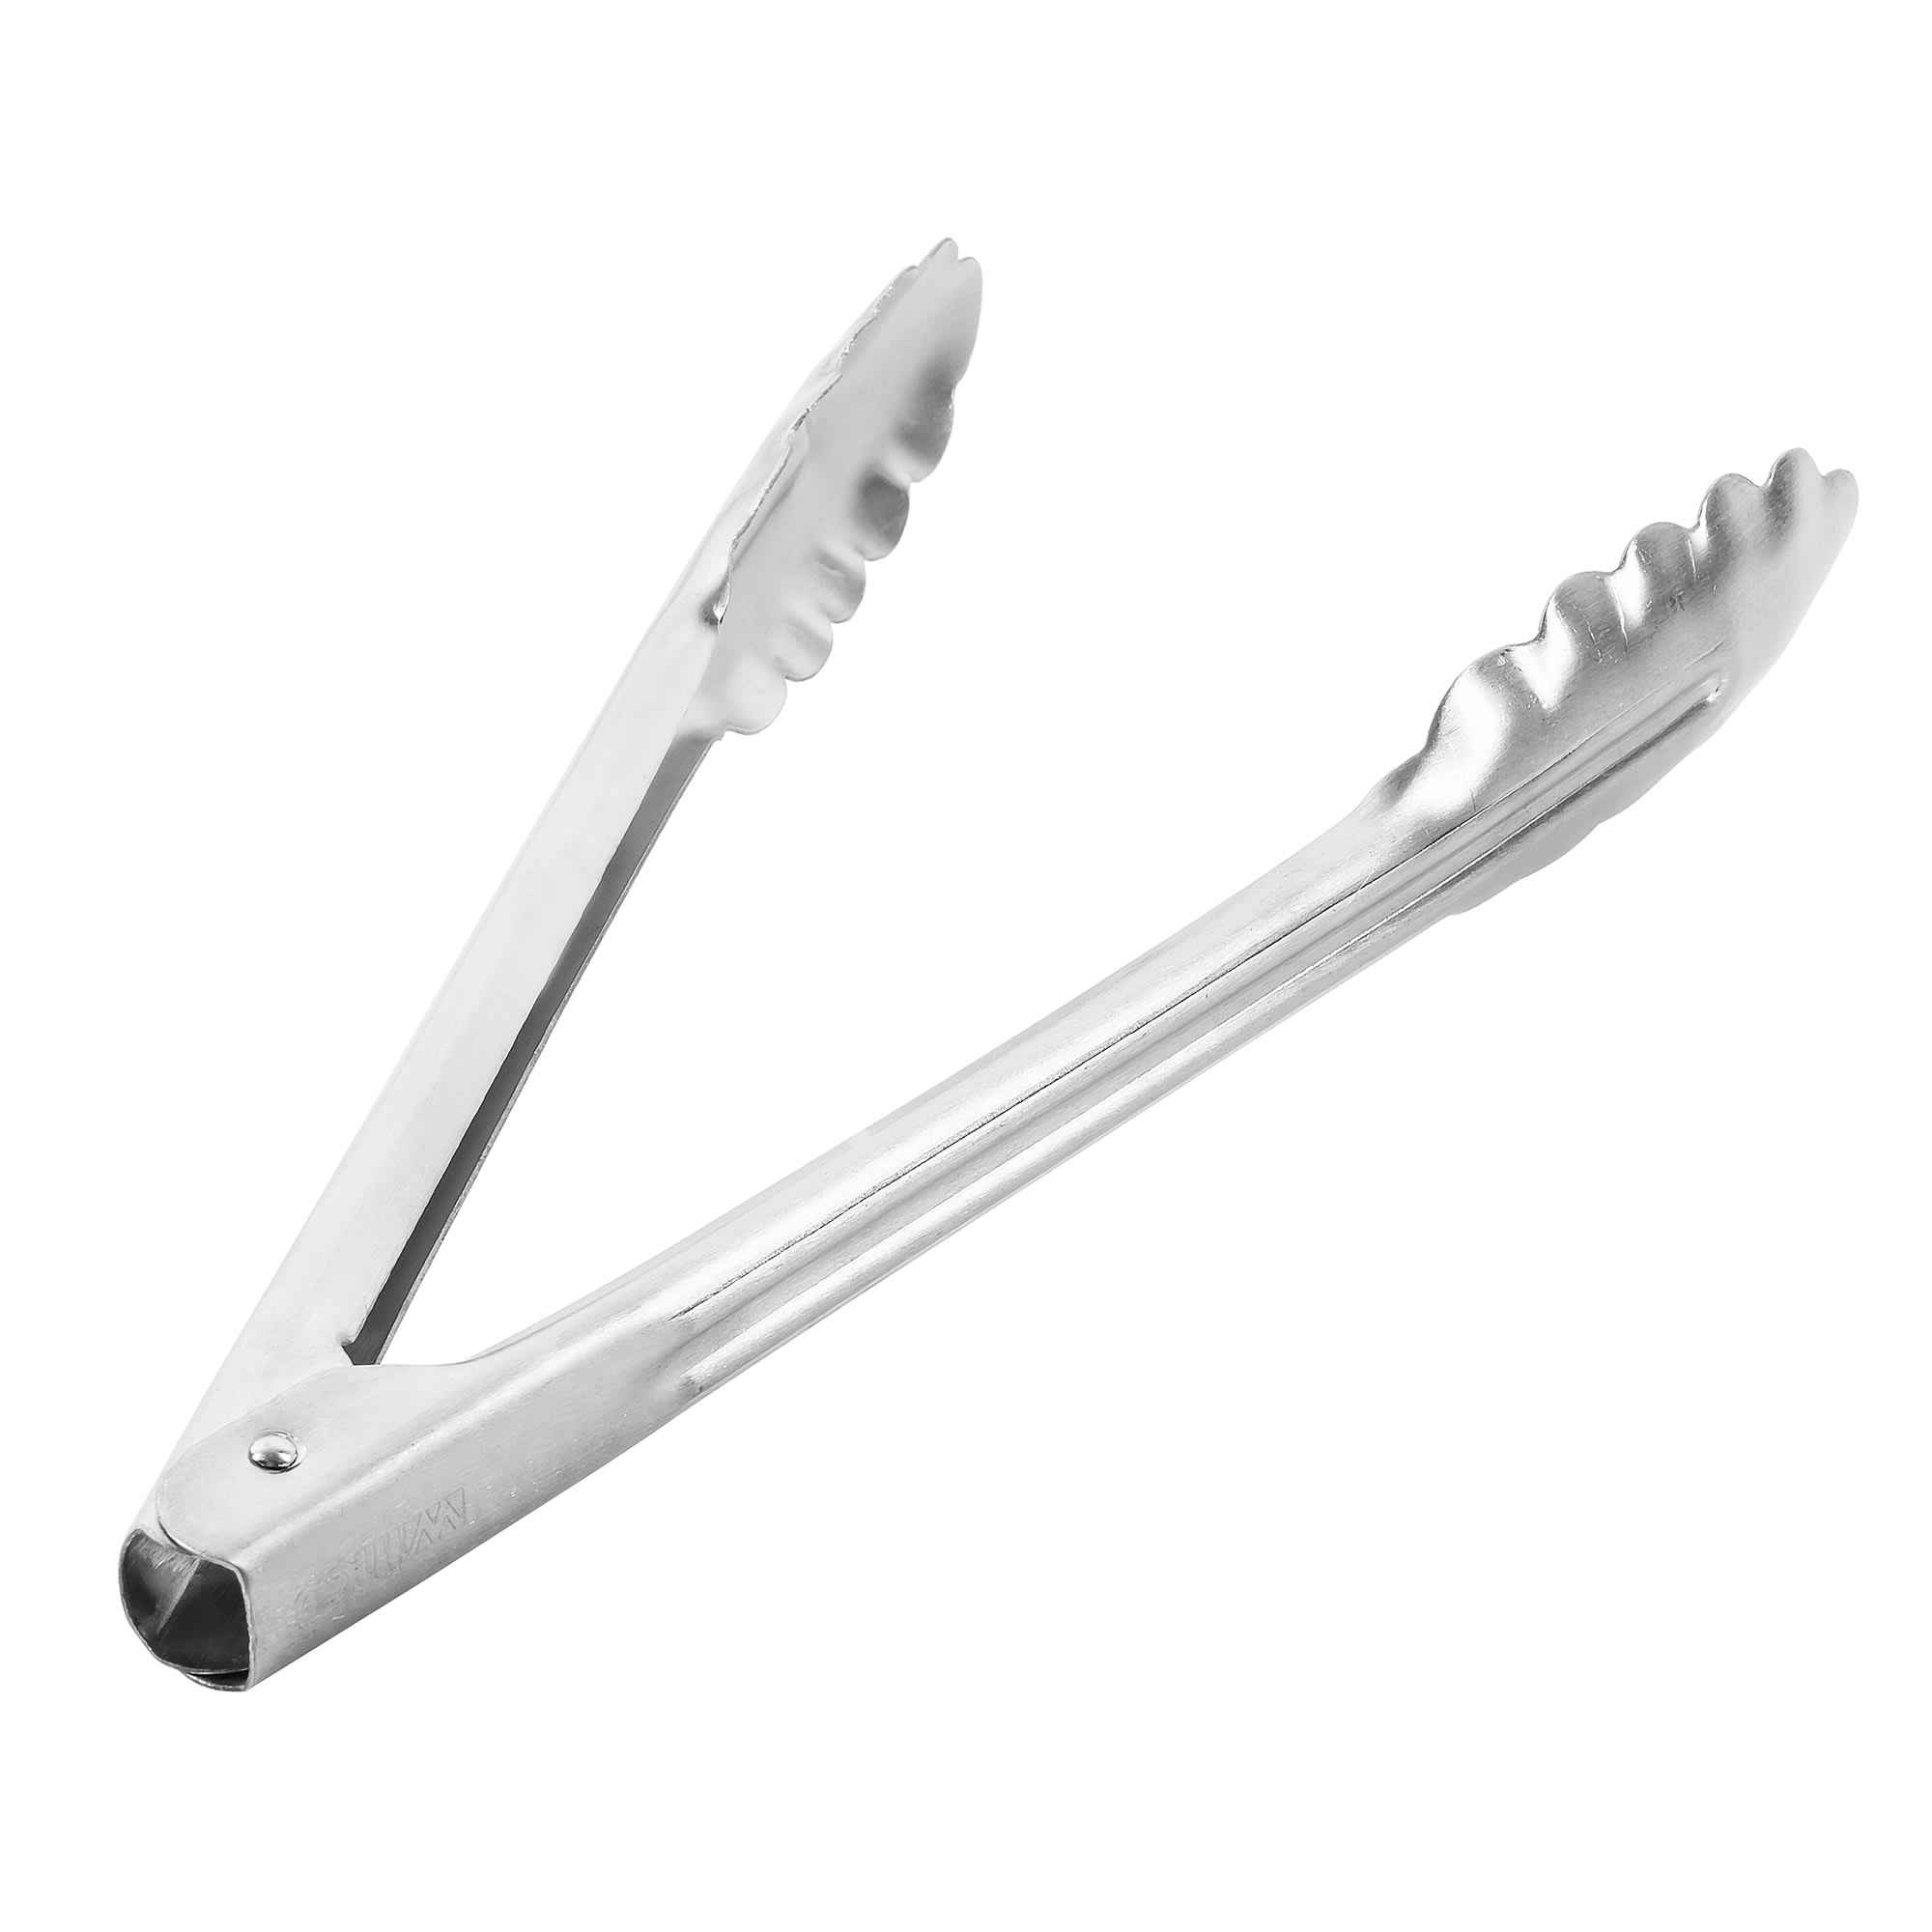 Winco 9-Inch Non-Slip Locking Tongs, Stainless Steel, 4-Count